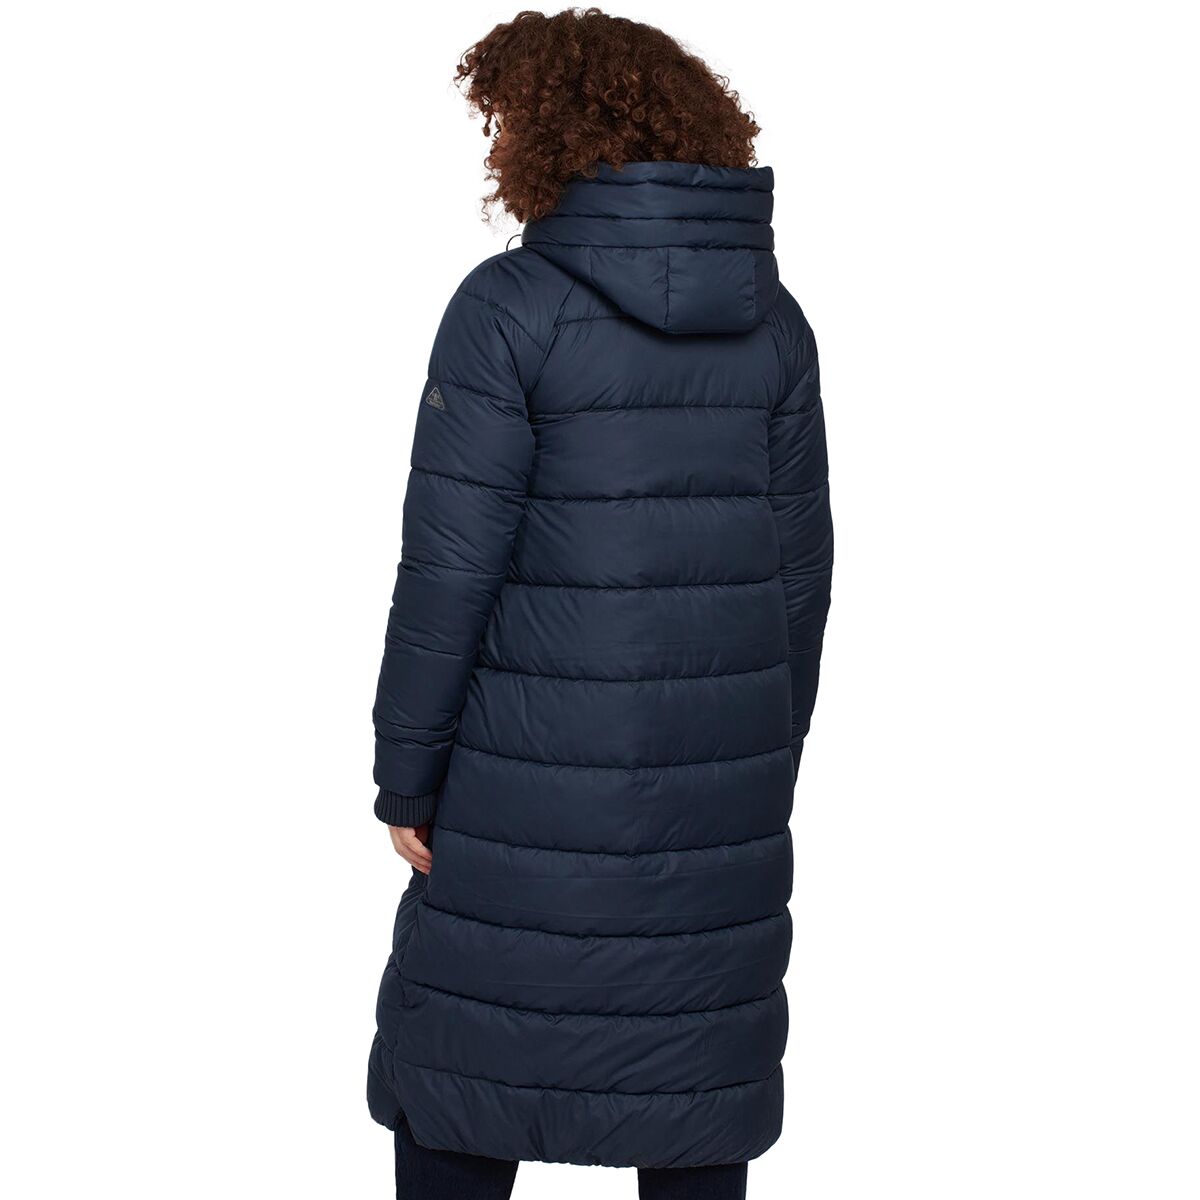 Barbour Crimdon Quilted Jacket - Women's - Clothing